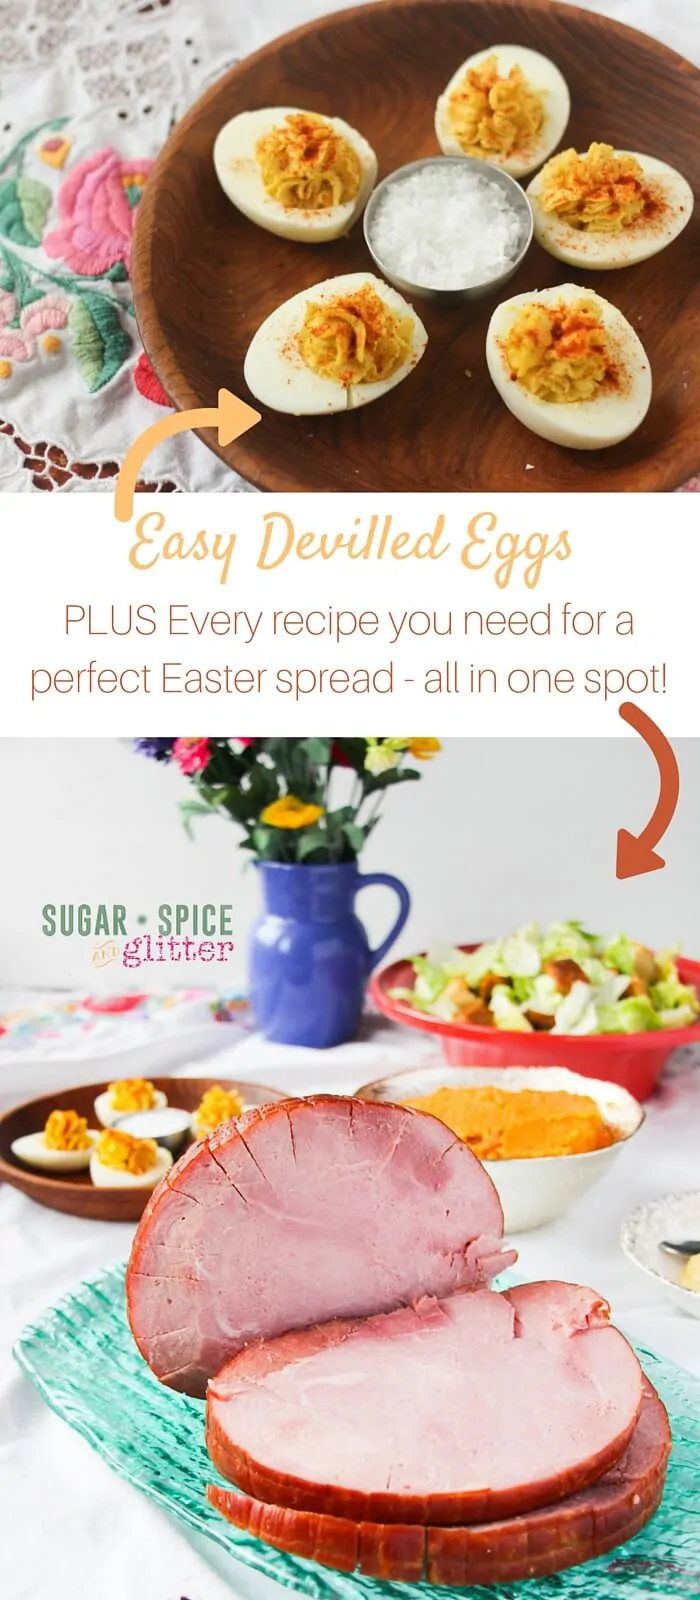 Easy Devilled Eggs, Honey-Caramel Ham, No-Mayo Caesar Salad, and more! Every Easter recipe you're going to need for the perfect Easter supper menu